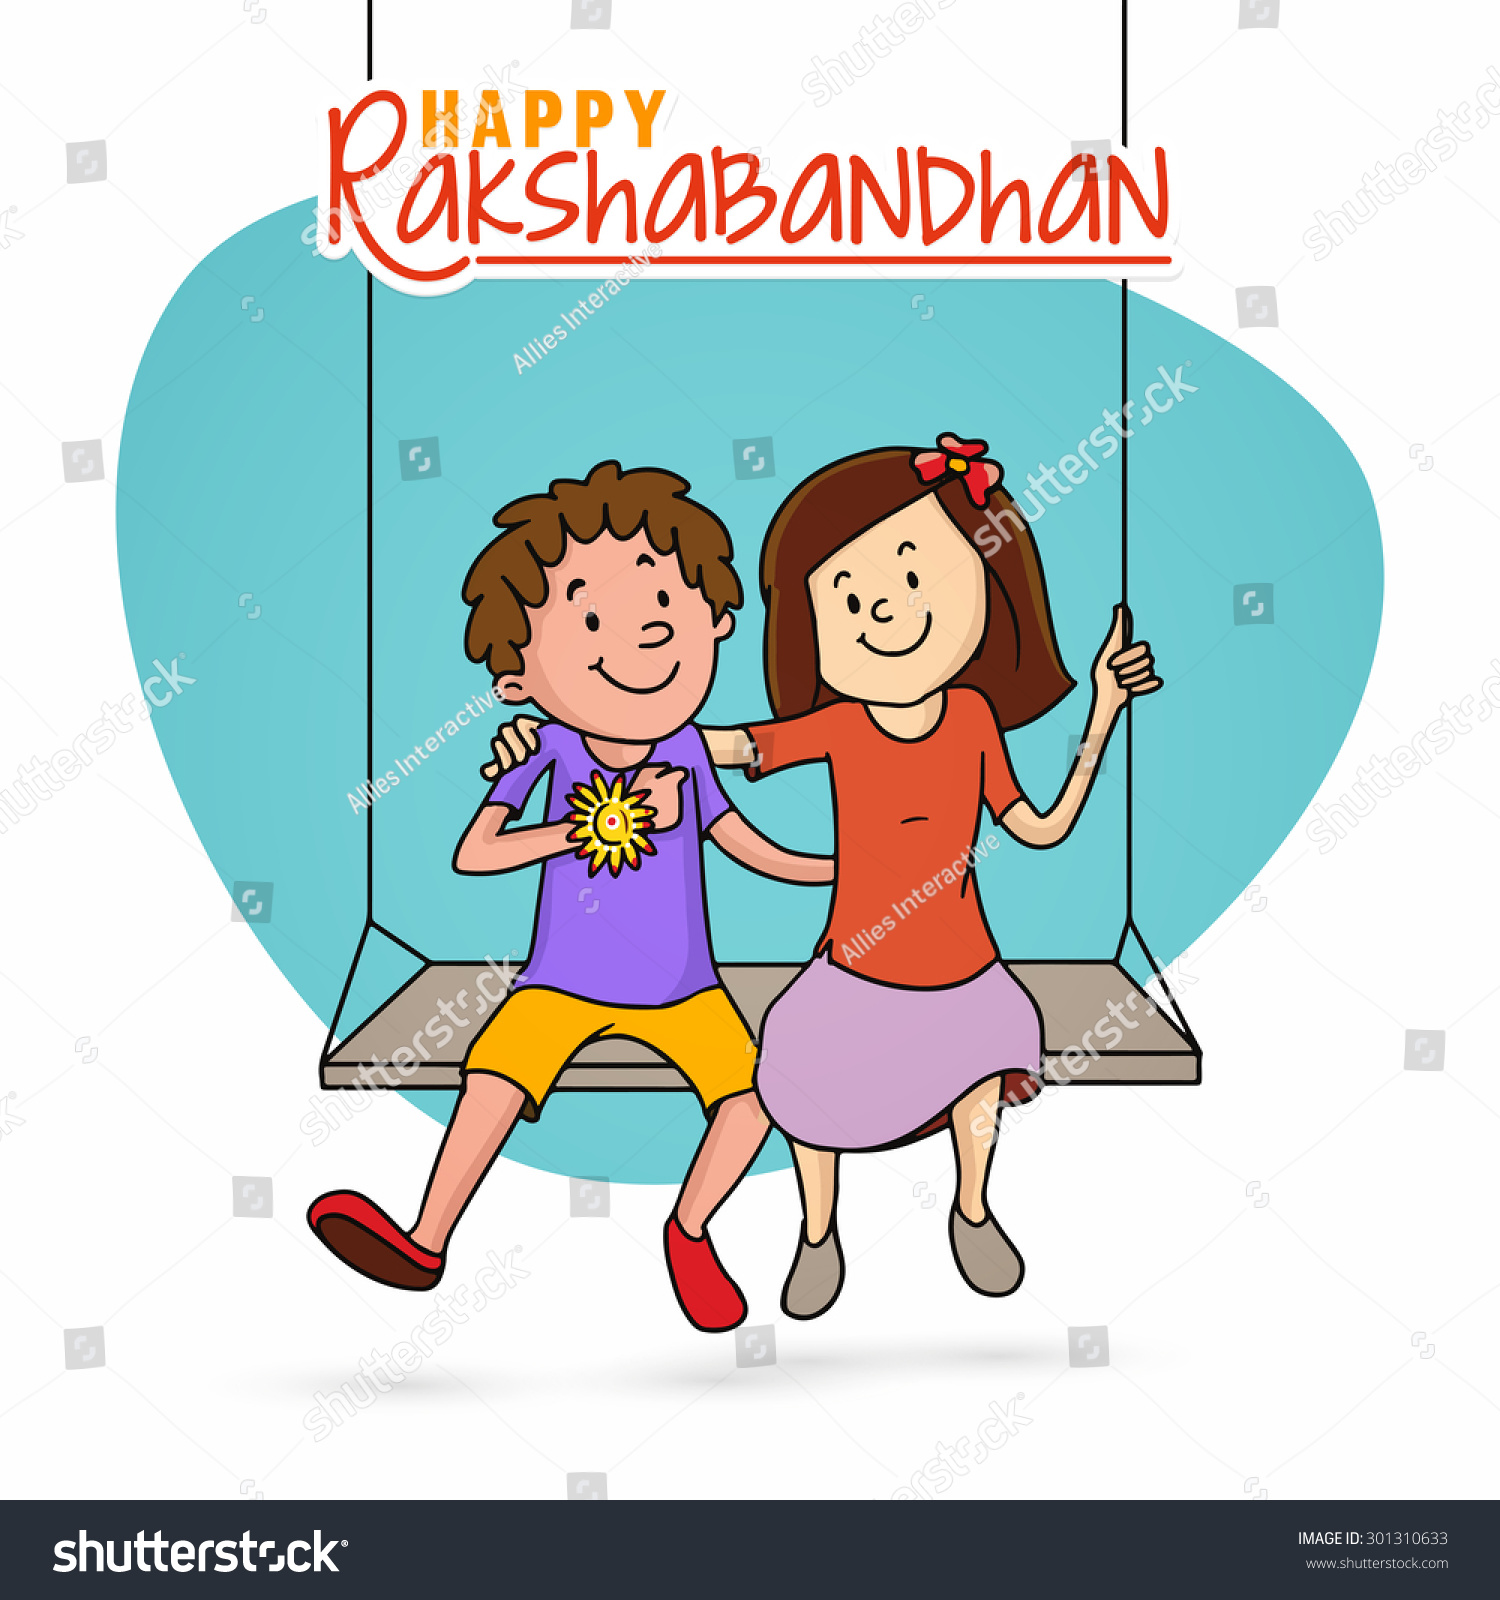 Opposite words for brother and sister illustration Stock 